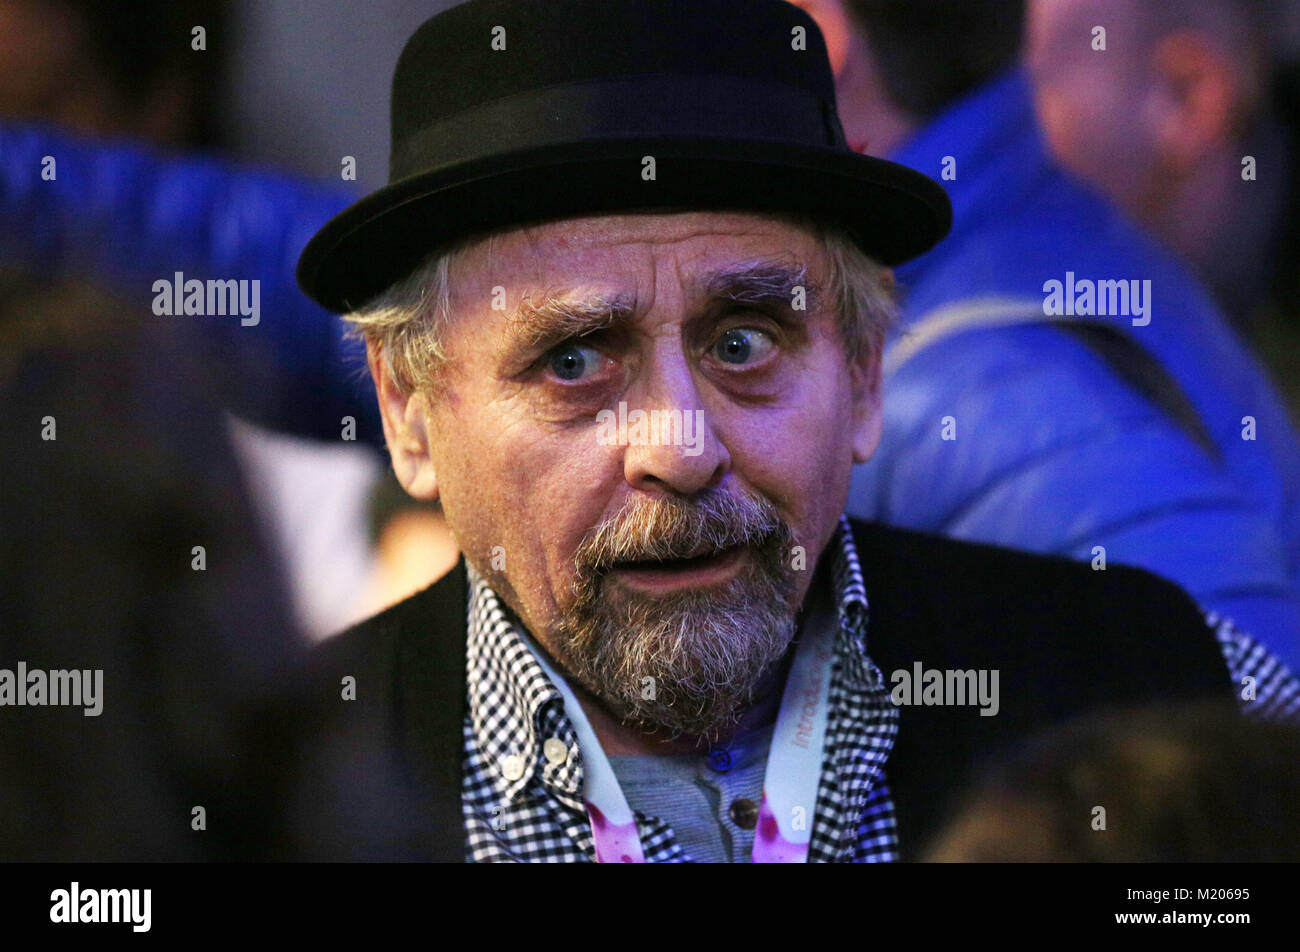 Former Doctor Who actor Sylvester McCoy at Edinburgh's Corn Exchange on the first day of Capital Sci-Fi Con, the pop culture, comic and movie convention which raises money for Children's Hospice Association Scotland (CHAS). Stock Photo